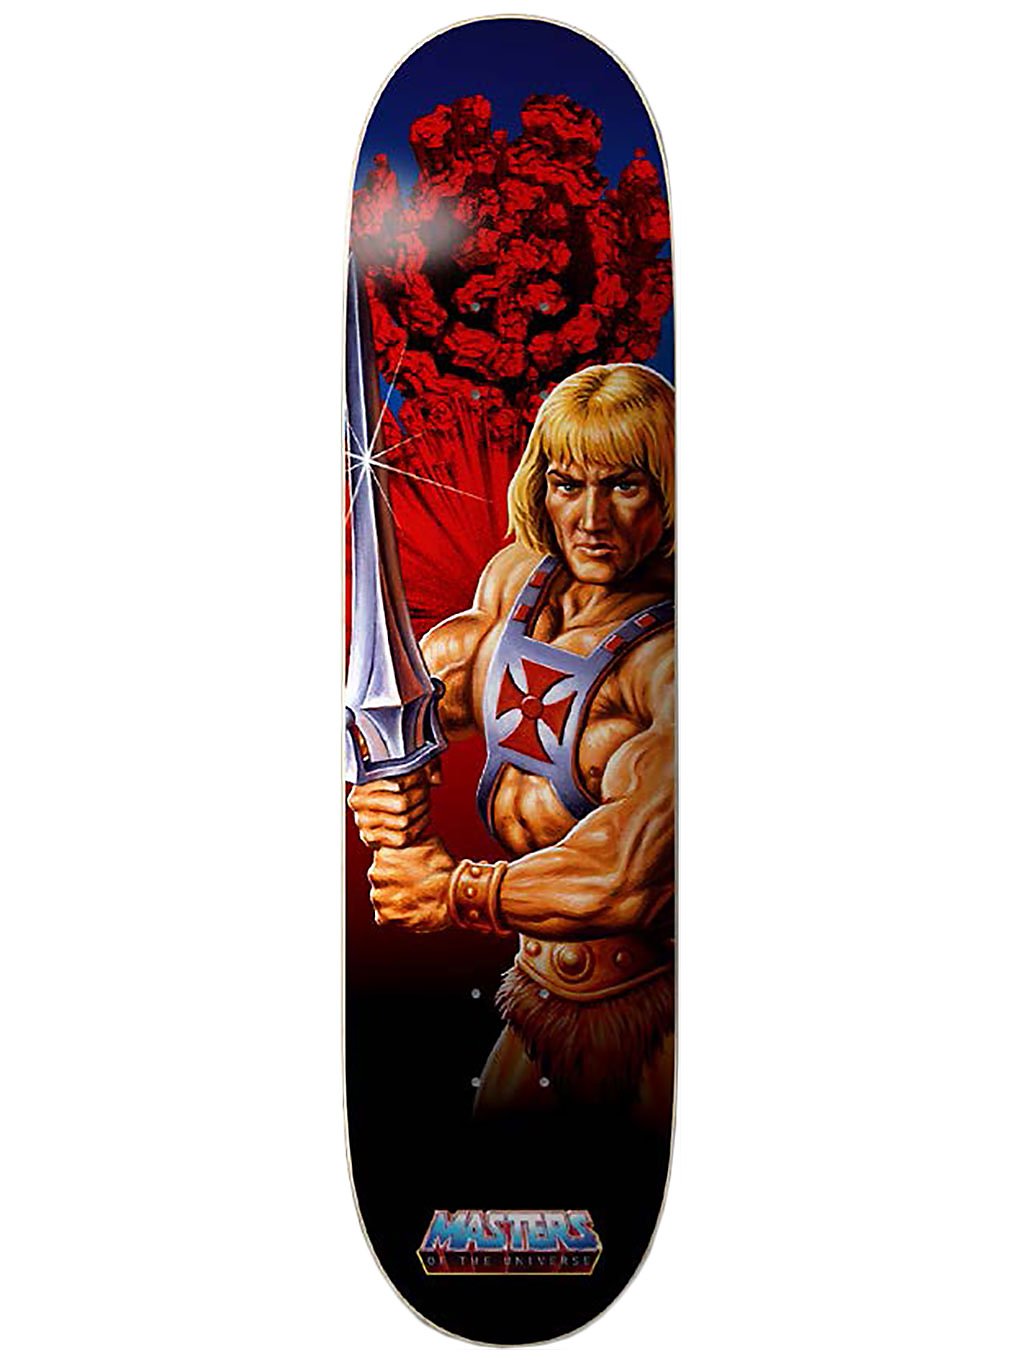 Element masters of the universe he-man 8.25 skateboard deck kuviotu, element